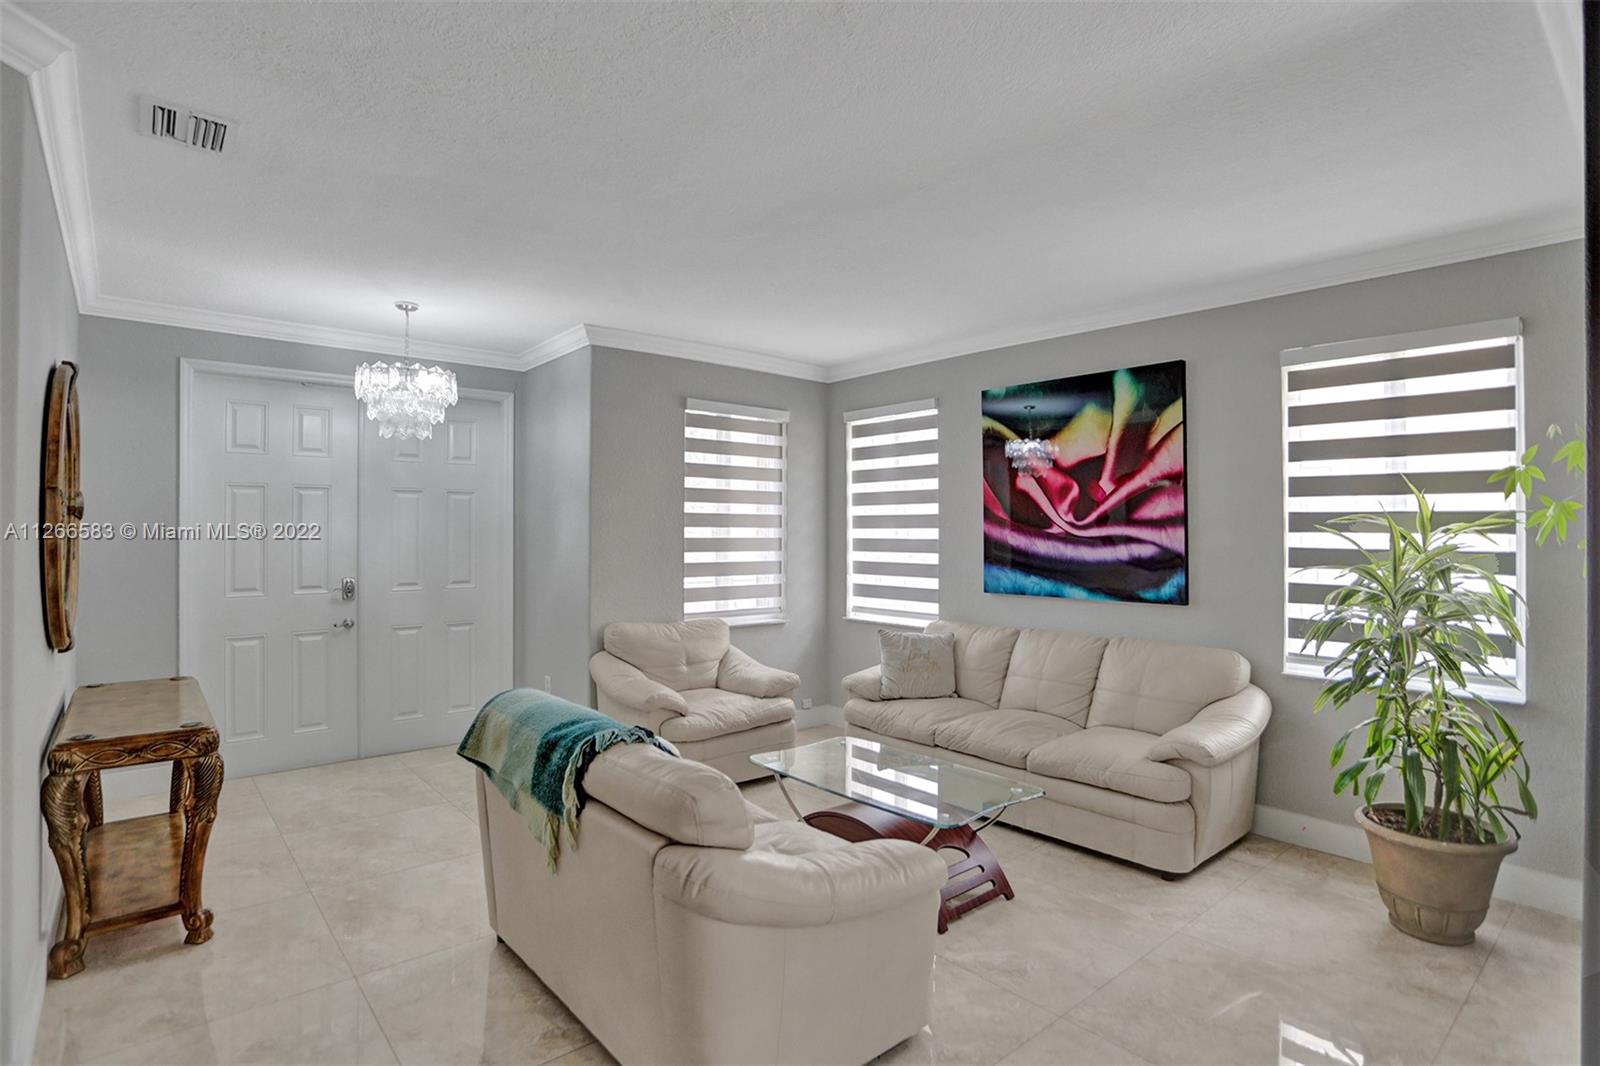 Beautiful & Unique Corner townhouse at Island at Doral.This tropical paradise is located between the Turnpike and 107th Avenue and from 74th to 90th street with a direct access ramp to the Turnpike Featuring 3 bedroom and 2 1/2 bath .Gorgeous Open layout with large living area and plenty of closet space, with two garage an laundry. Paved patio with a pergola to enjoy family time. This is a desirable gated community with amenities included such as fitness center, swimming pool and gym. Call me for an appointment.